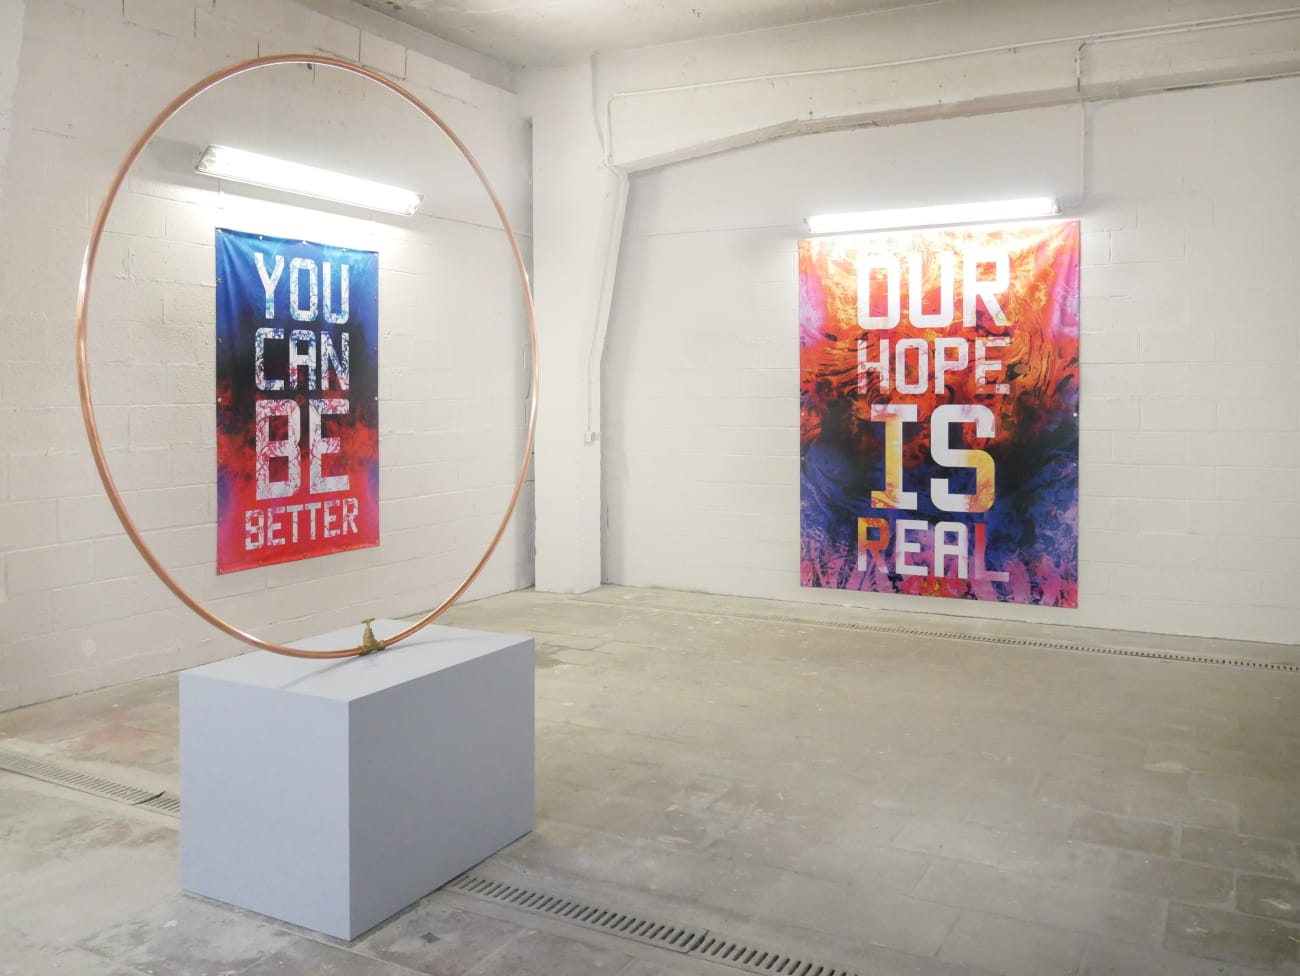 Mark TITCHNER, OUR HOPE IS REAL, 2016